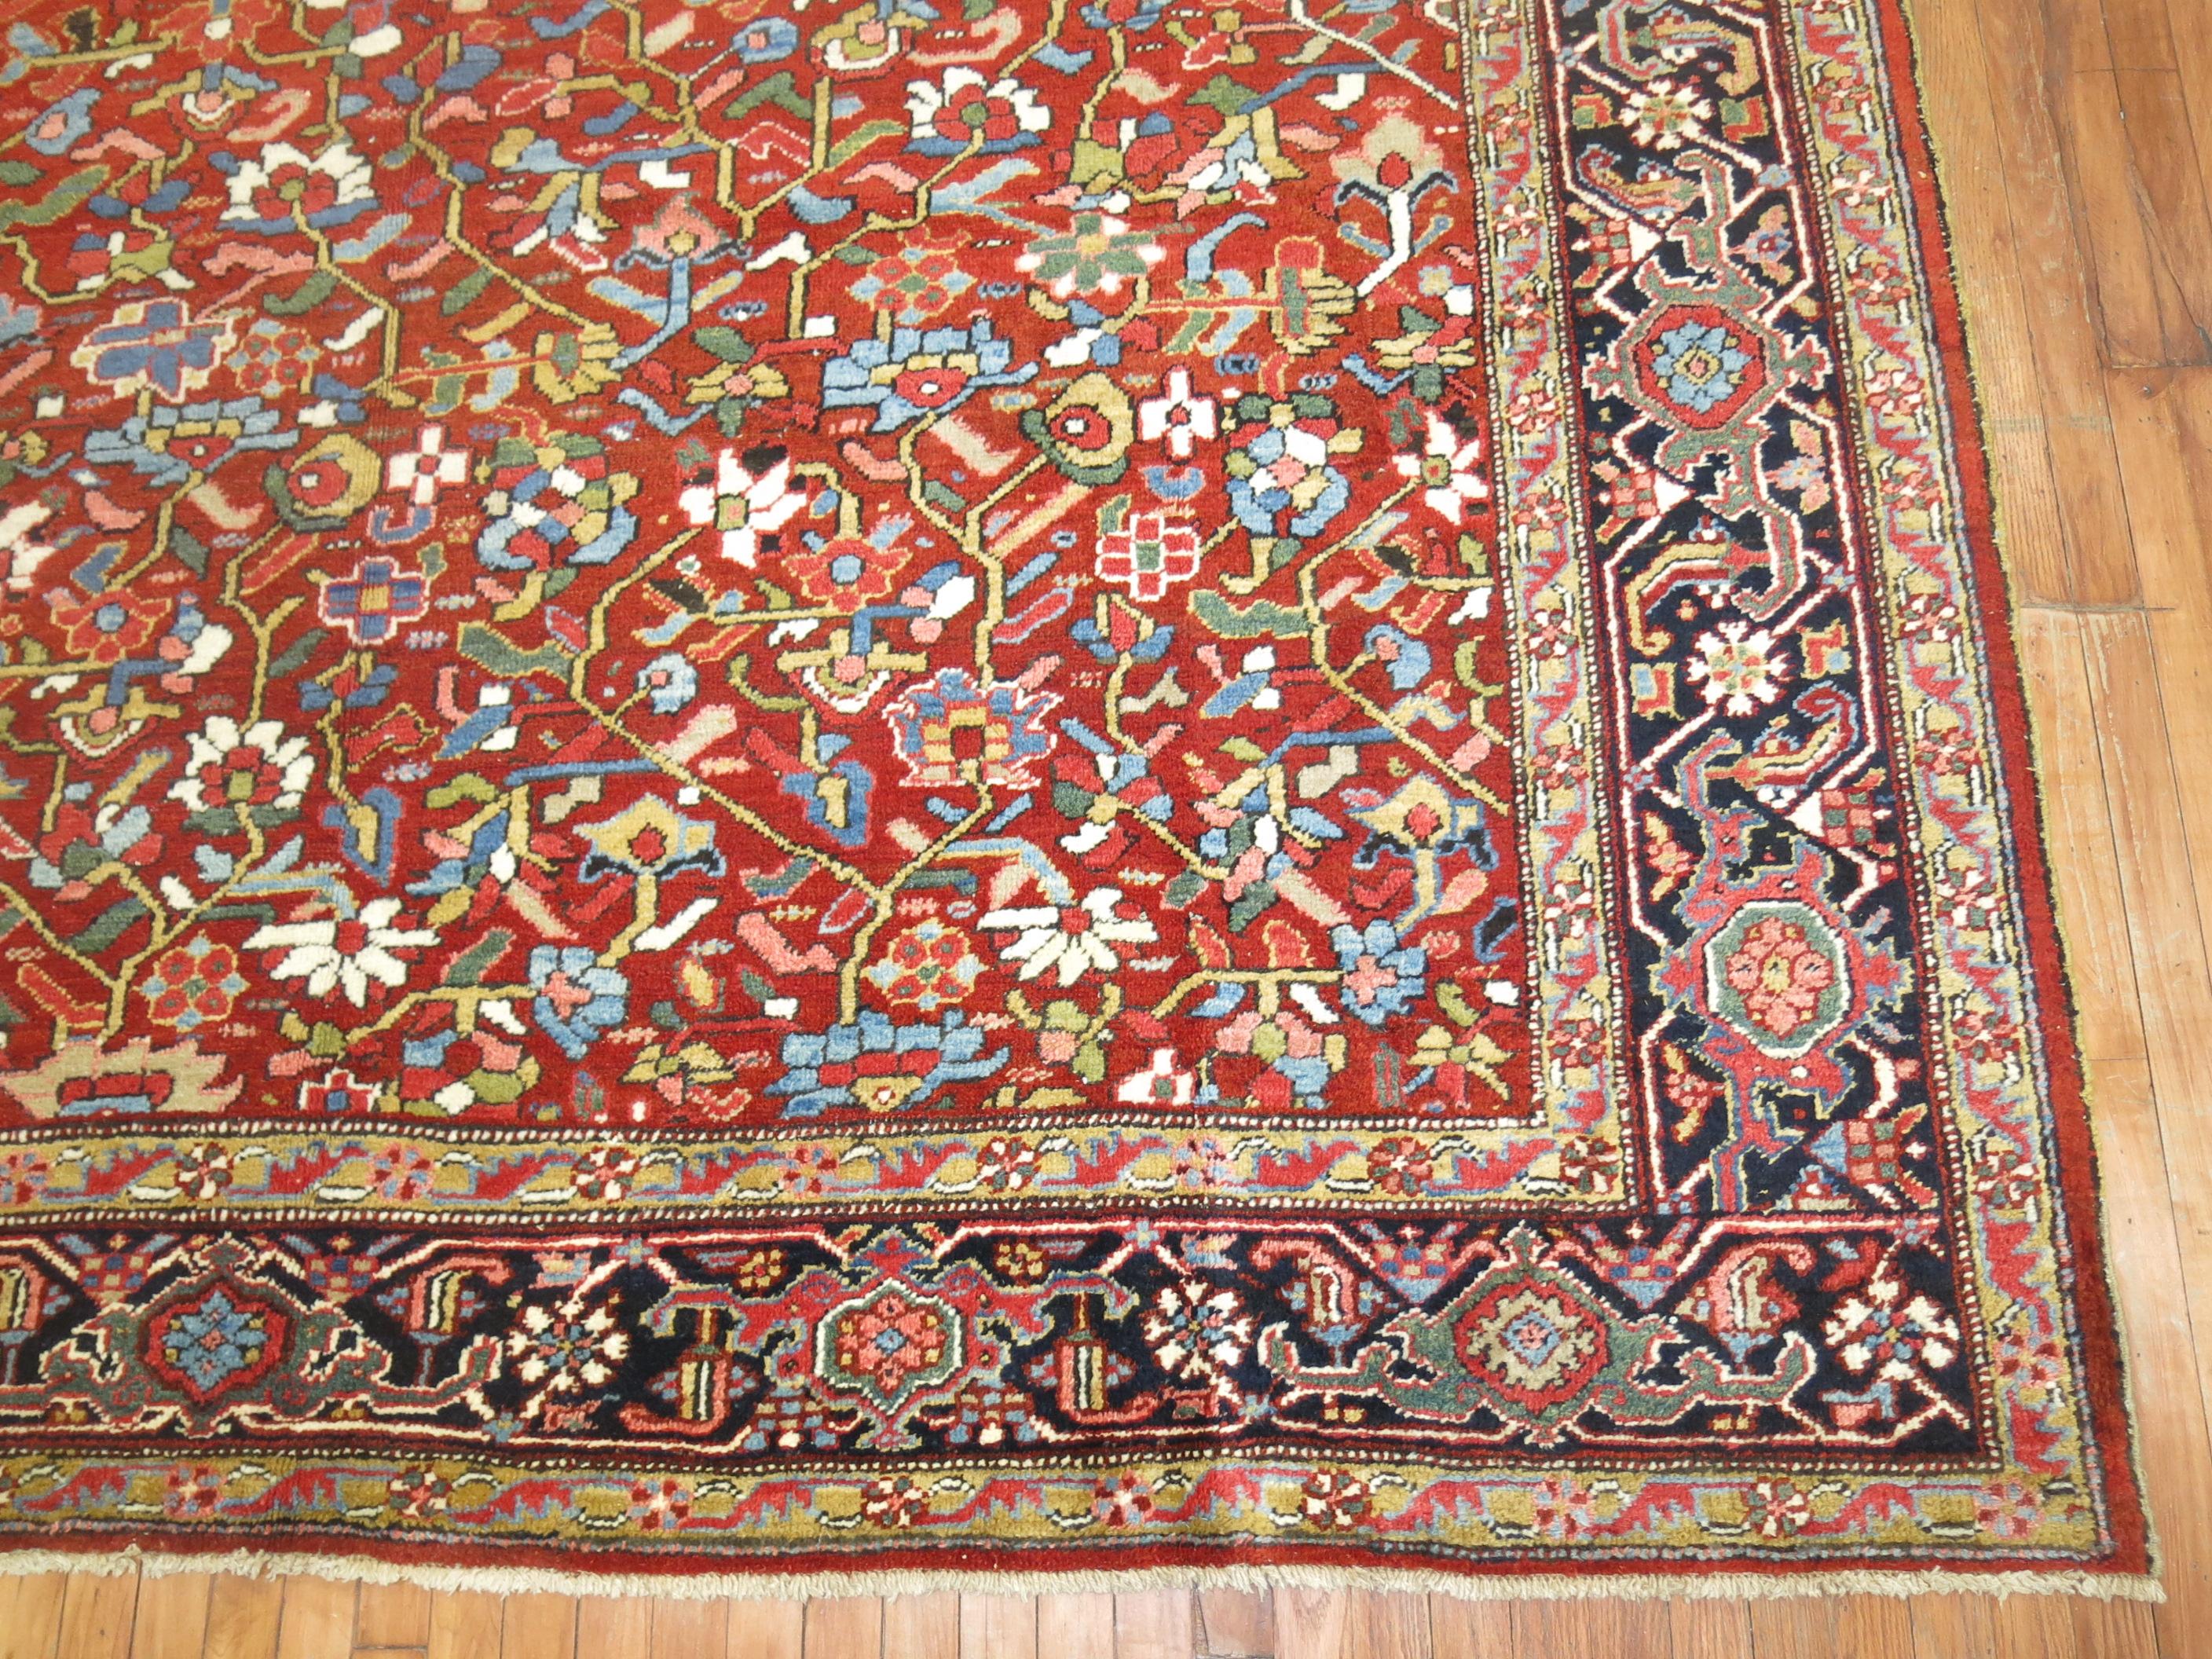 A room size antique Persian Heriz rug featuring a vivid red field with a slew of colorful accents and a navy border. The all-over repetitive design is uncharacteristic from the medallion formats made from this region, circa 1930.

Size: 9'8” x